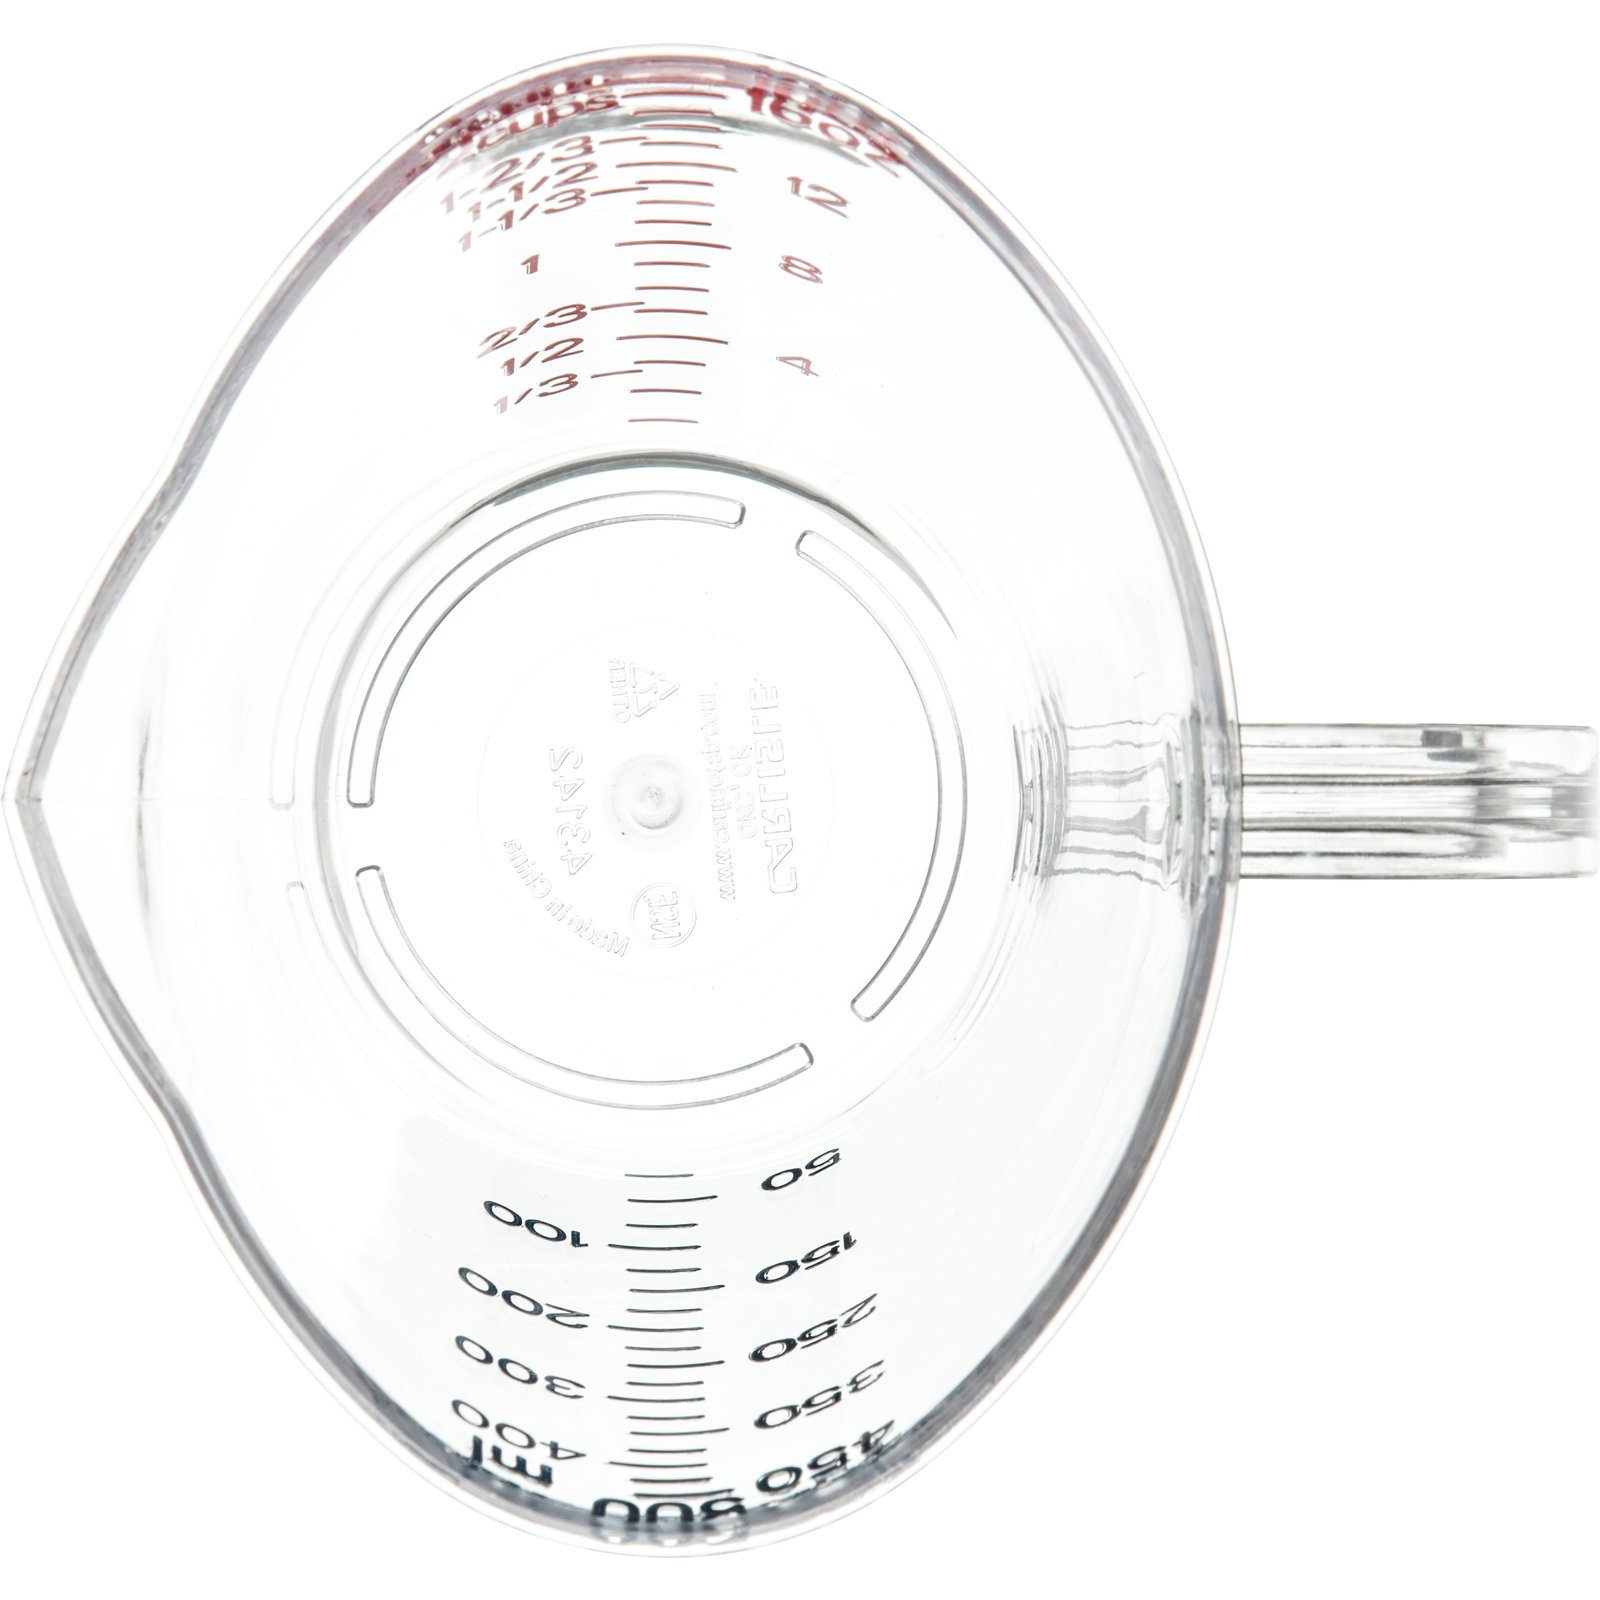 4314207 - Commercial Measuring Cup 1 pt - Clear | Carlisle FoodService ...